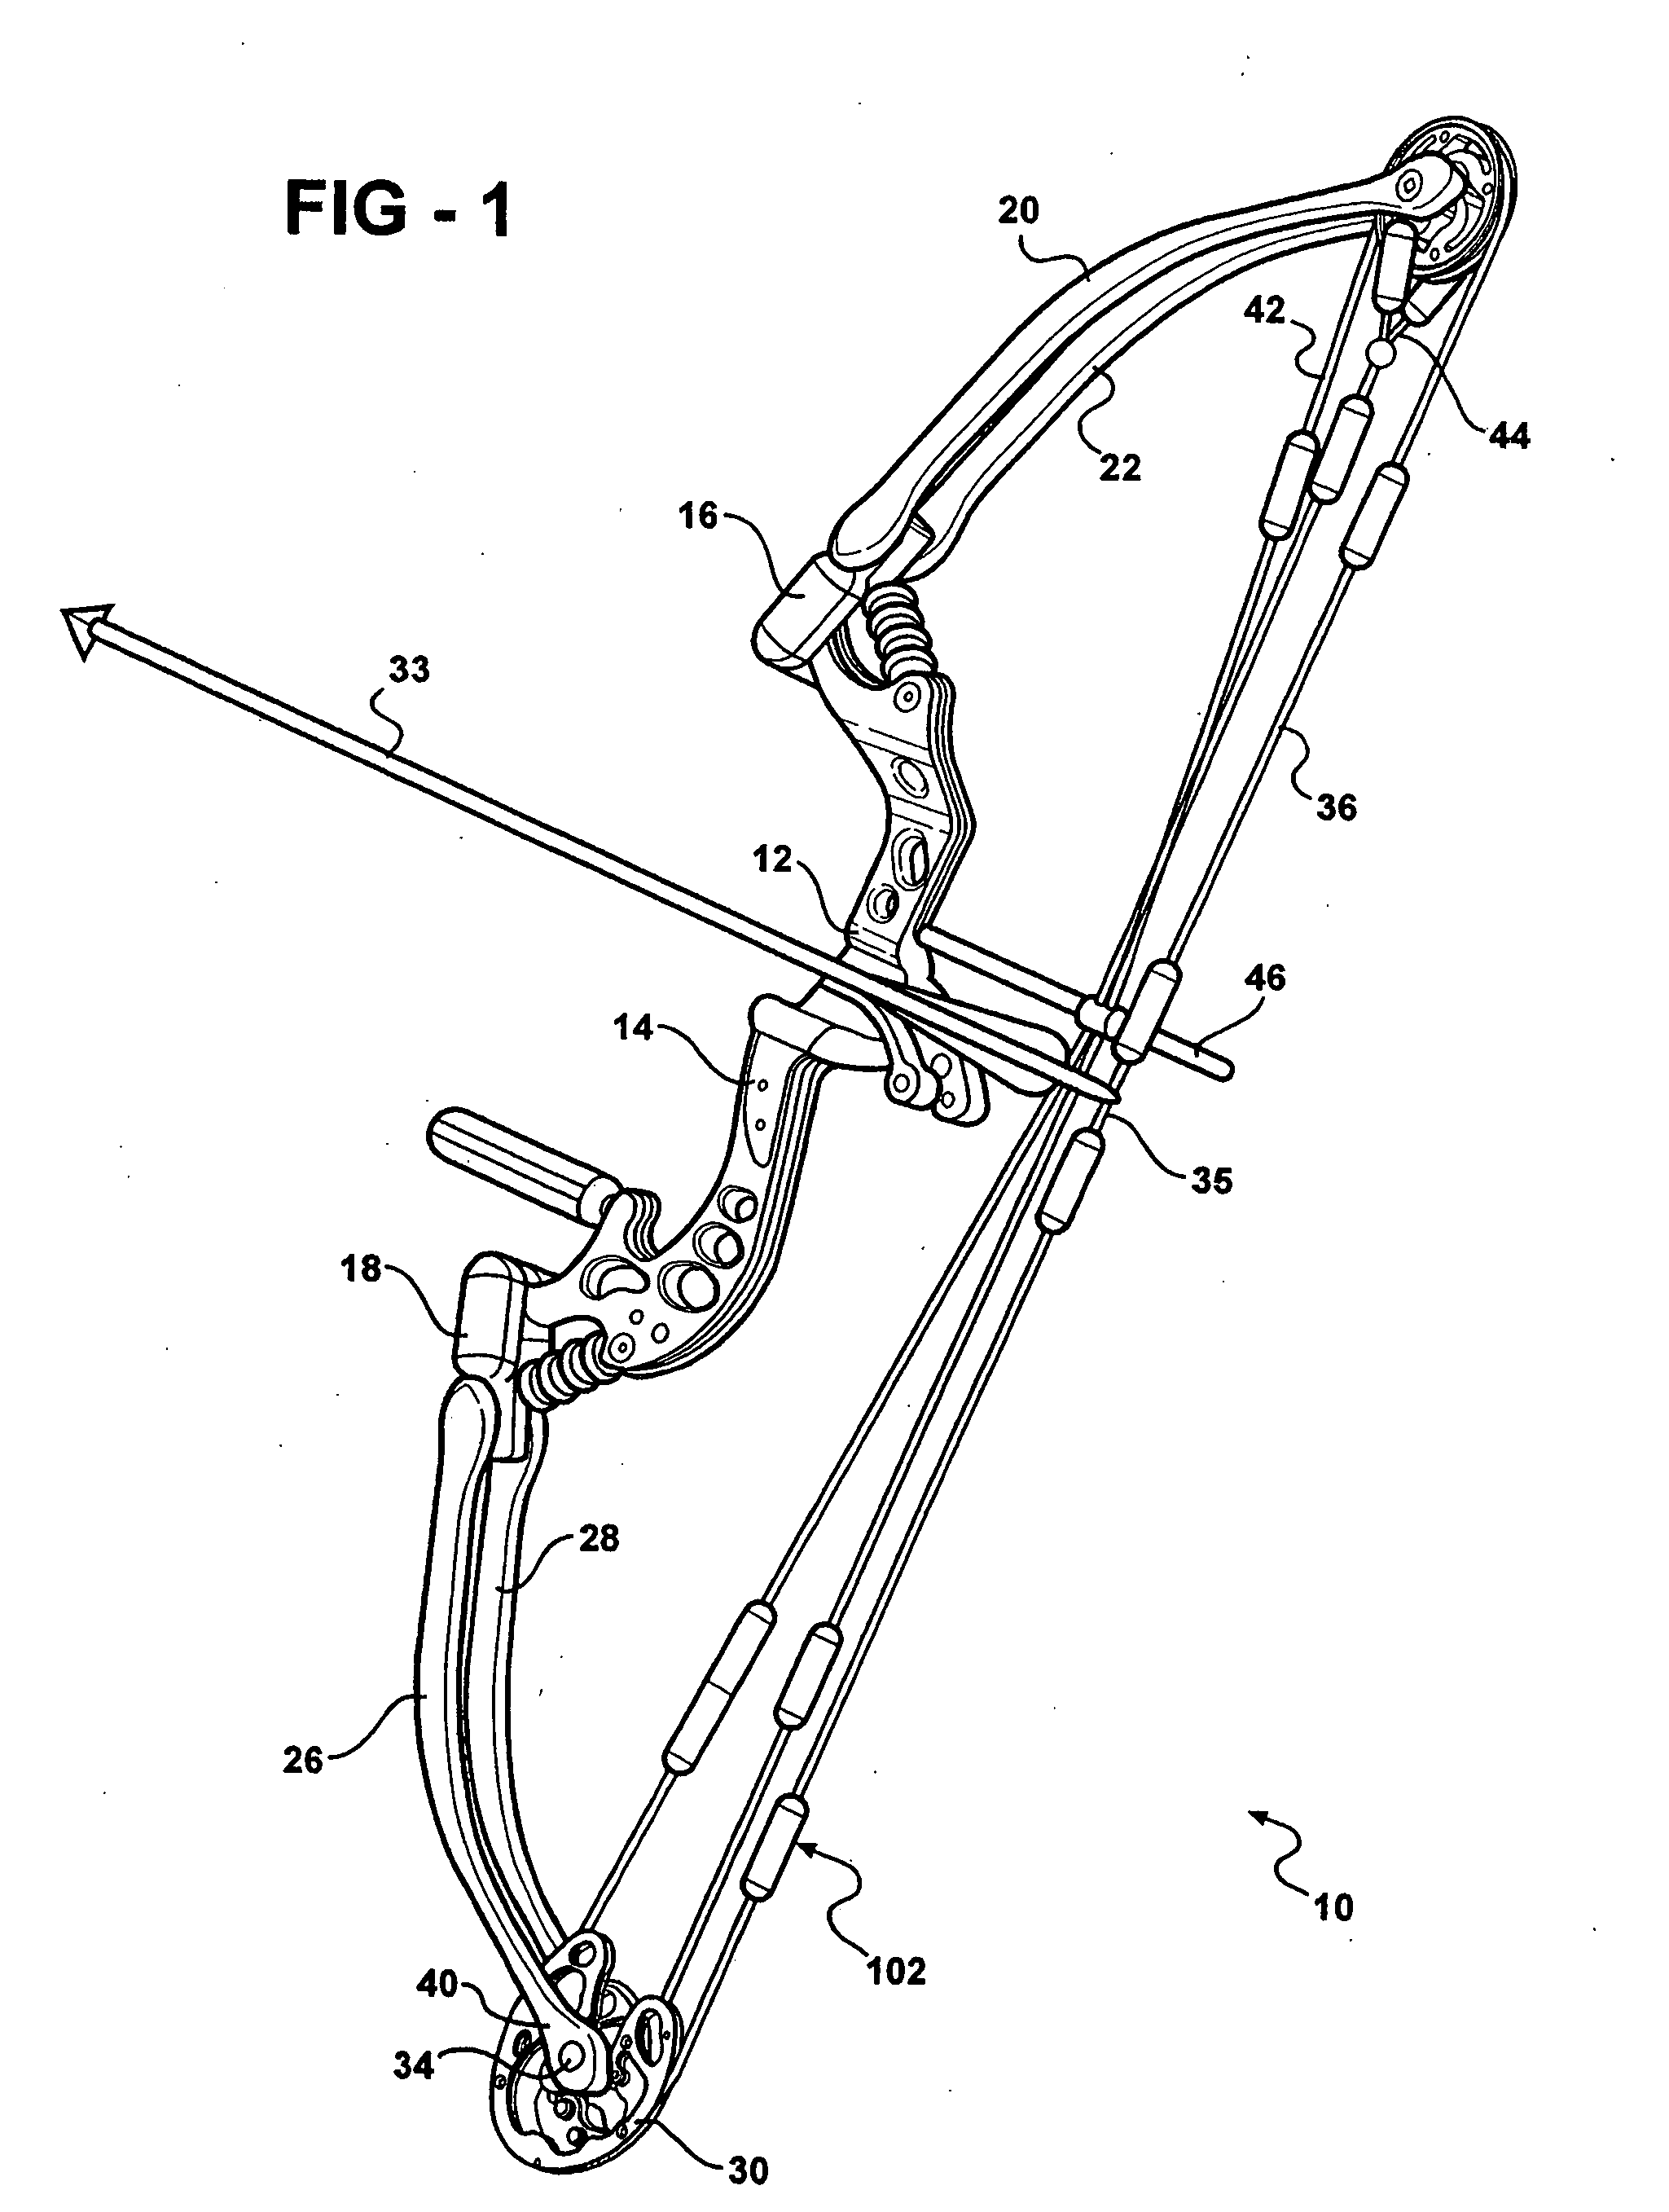 Bow suspension system